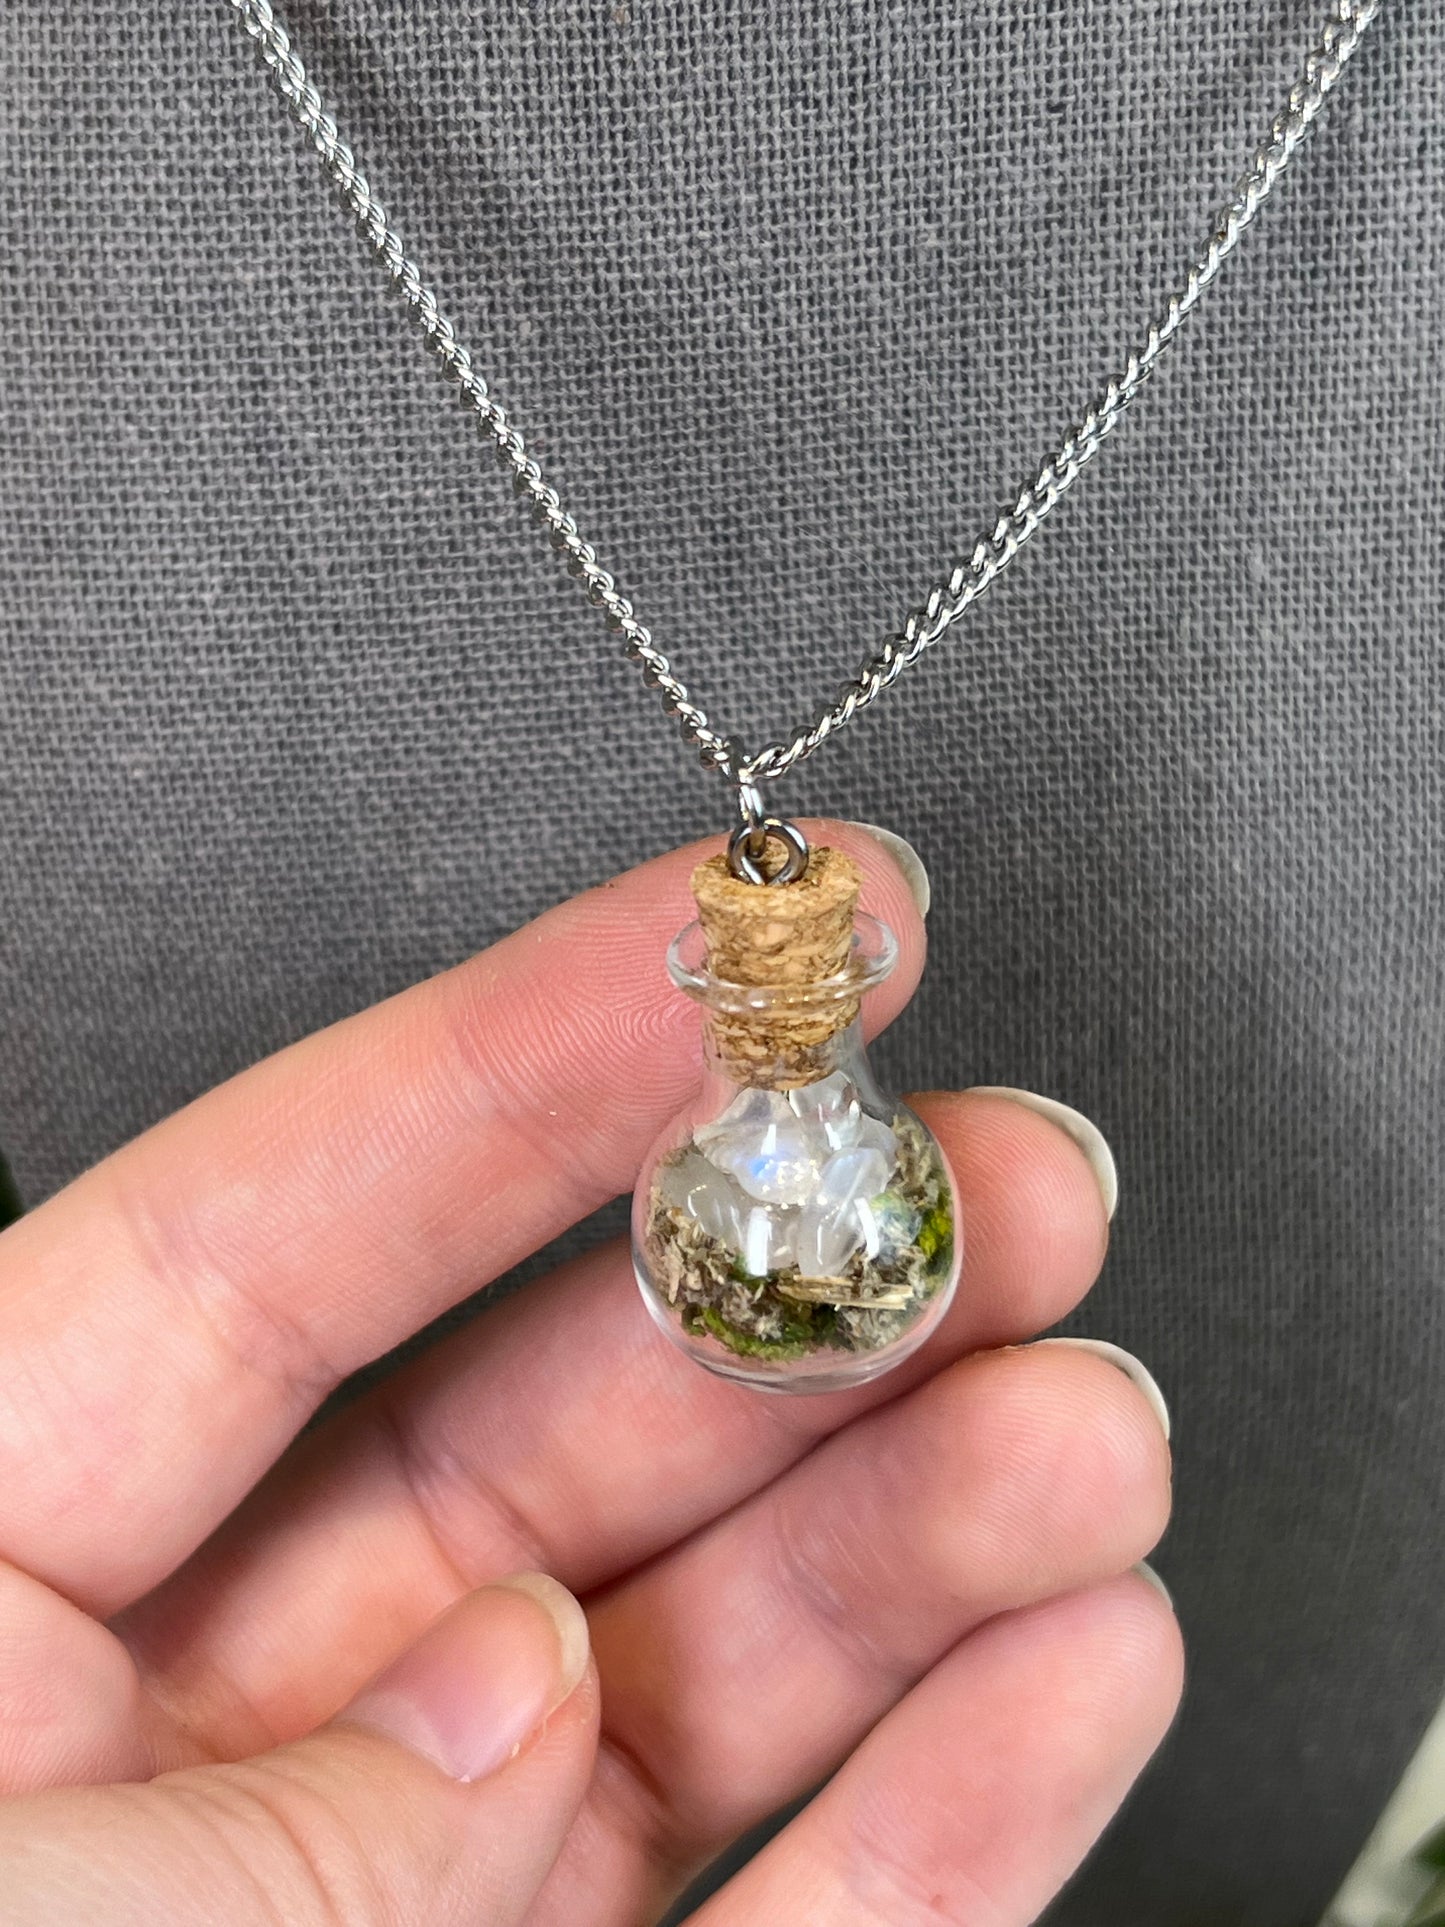 Spell Jar Orb Necklaces